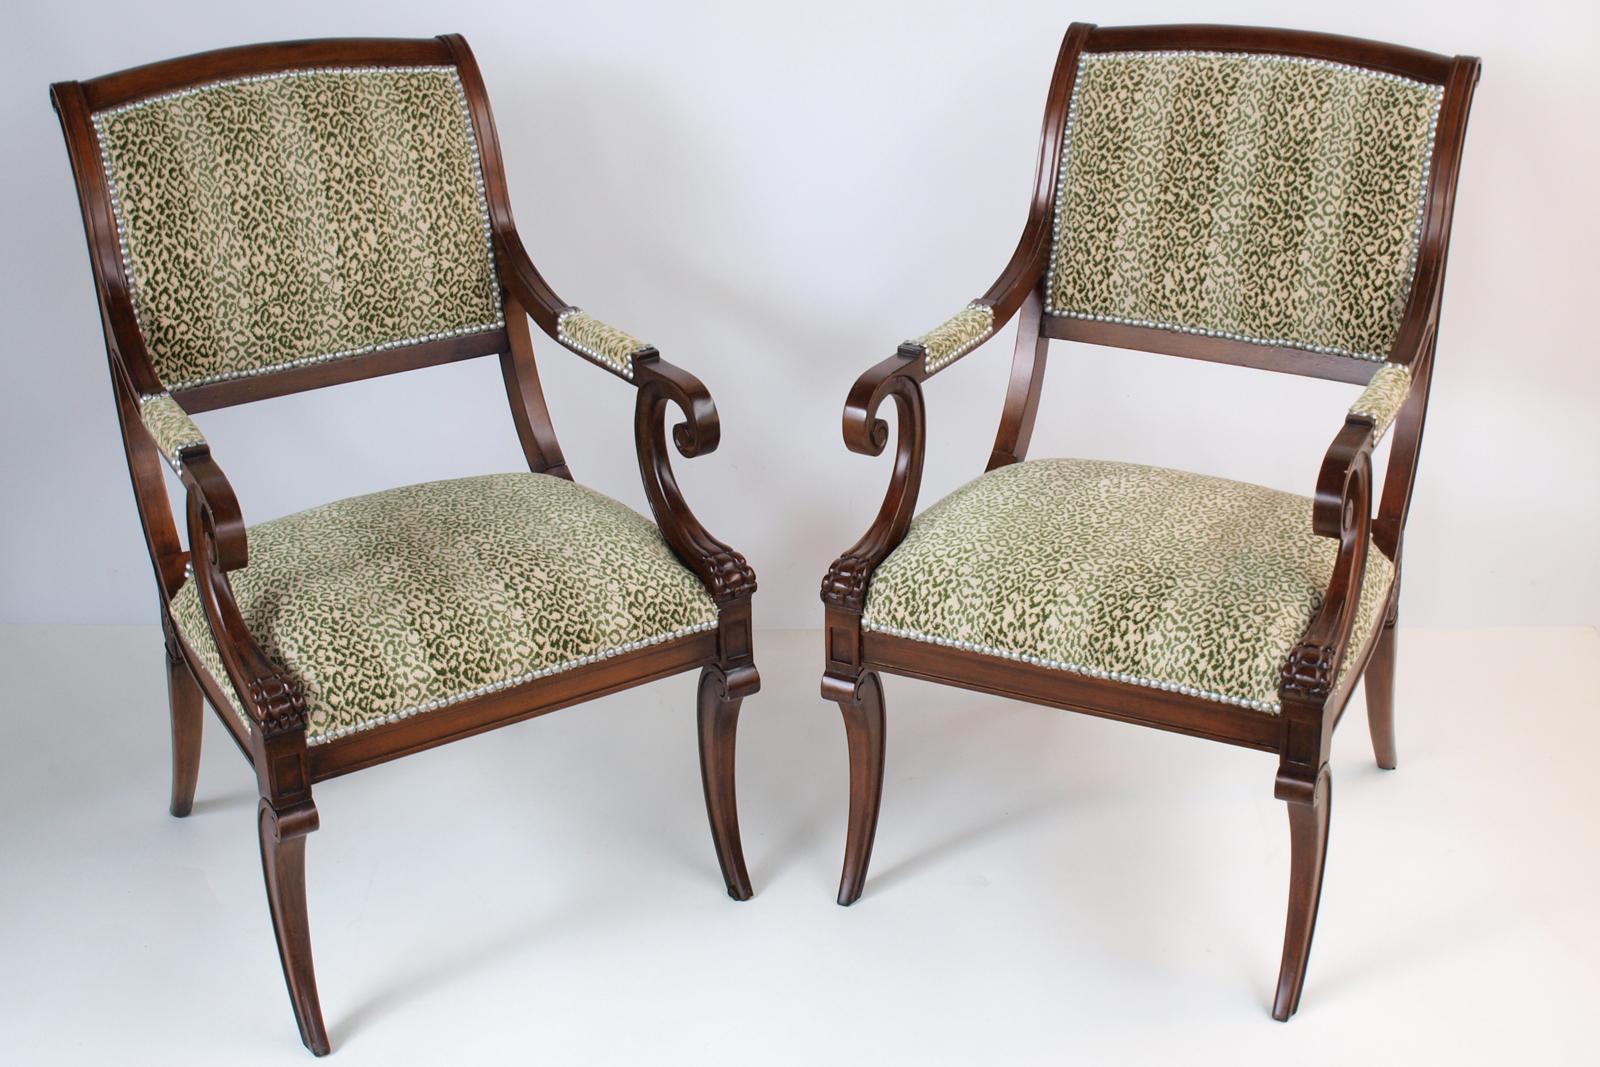 Pair of klismos-form armchairs, having solid mahogany frames with curved tablet form padded backrest, issuing scrolling arms, on downswept, paw-form terminals, its crown seat on the fielded apron, raised on square, tapering, sabre legs. Upholstered